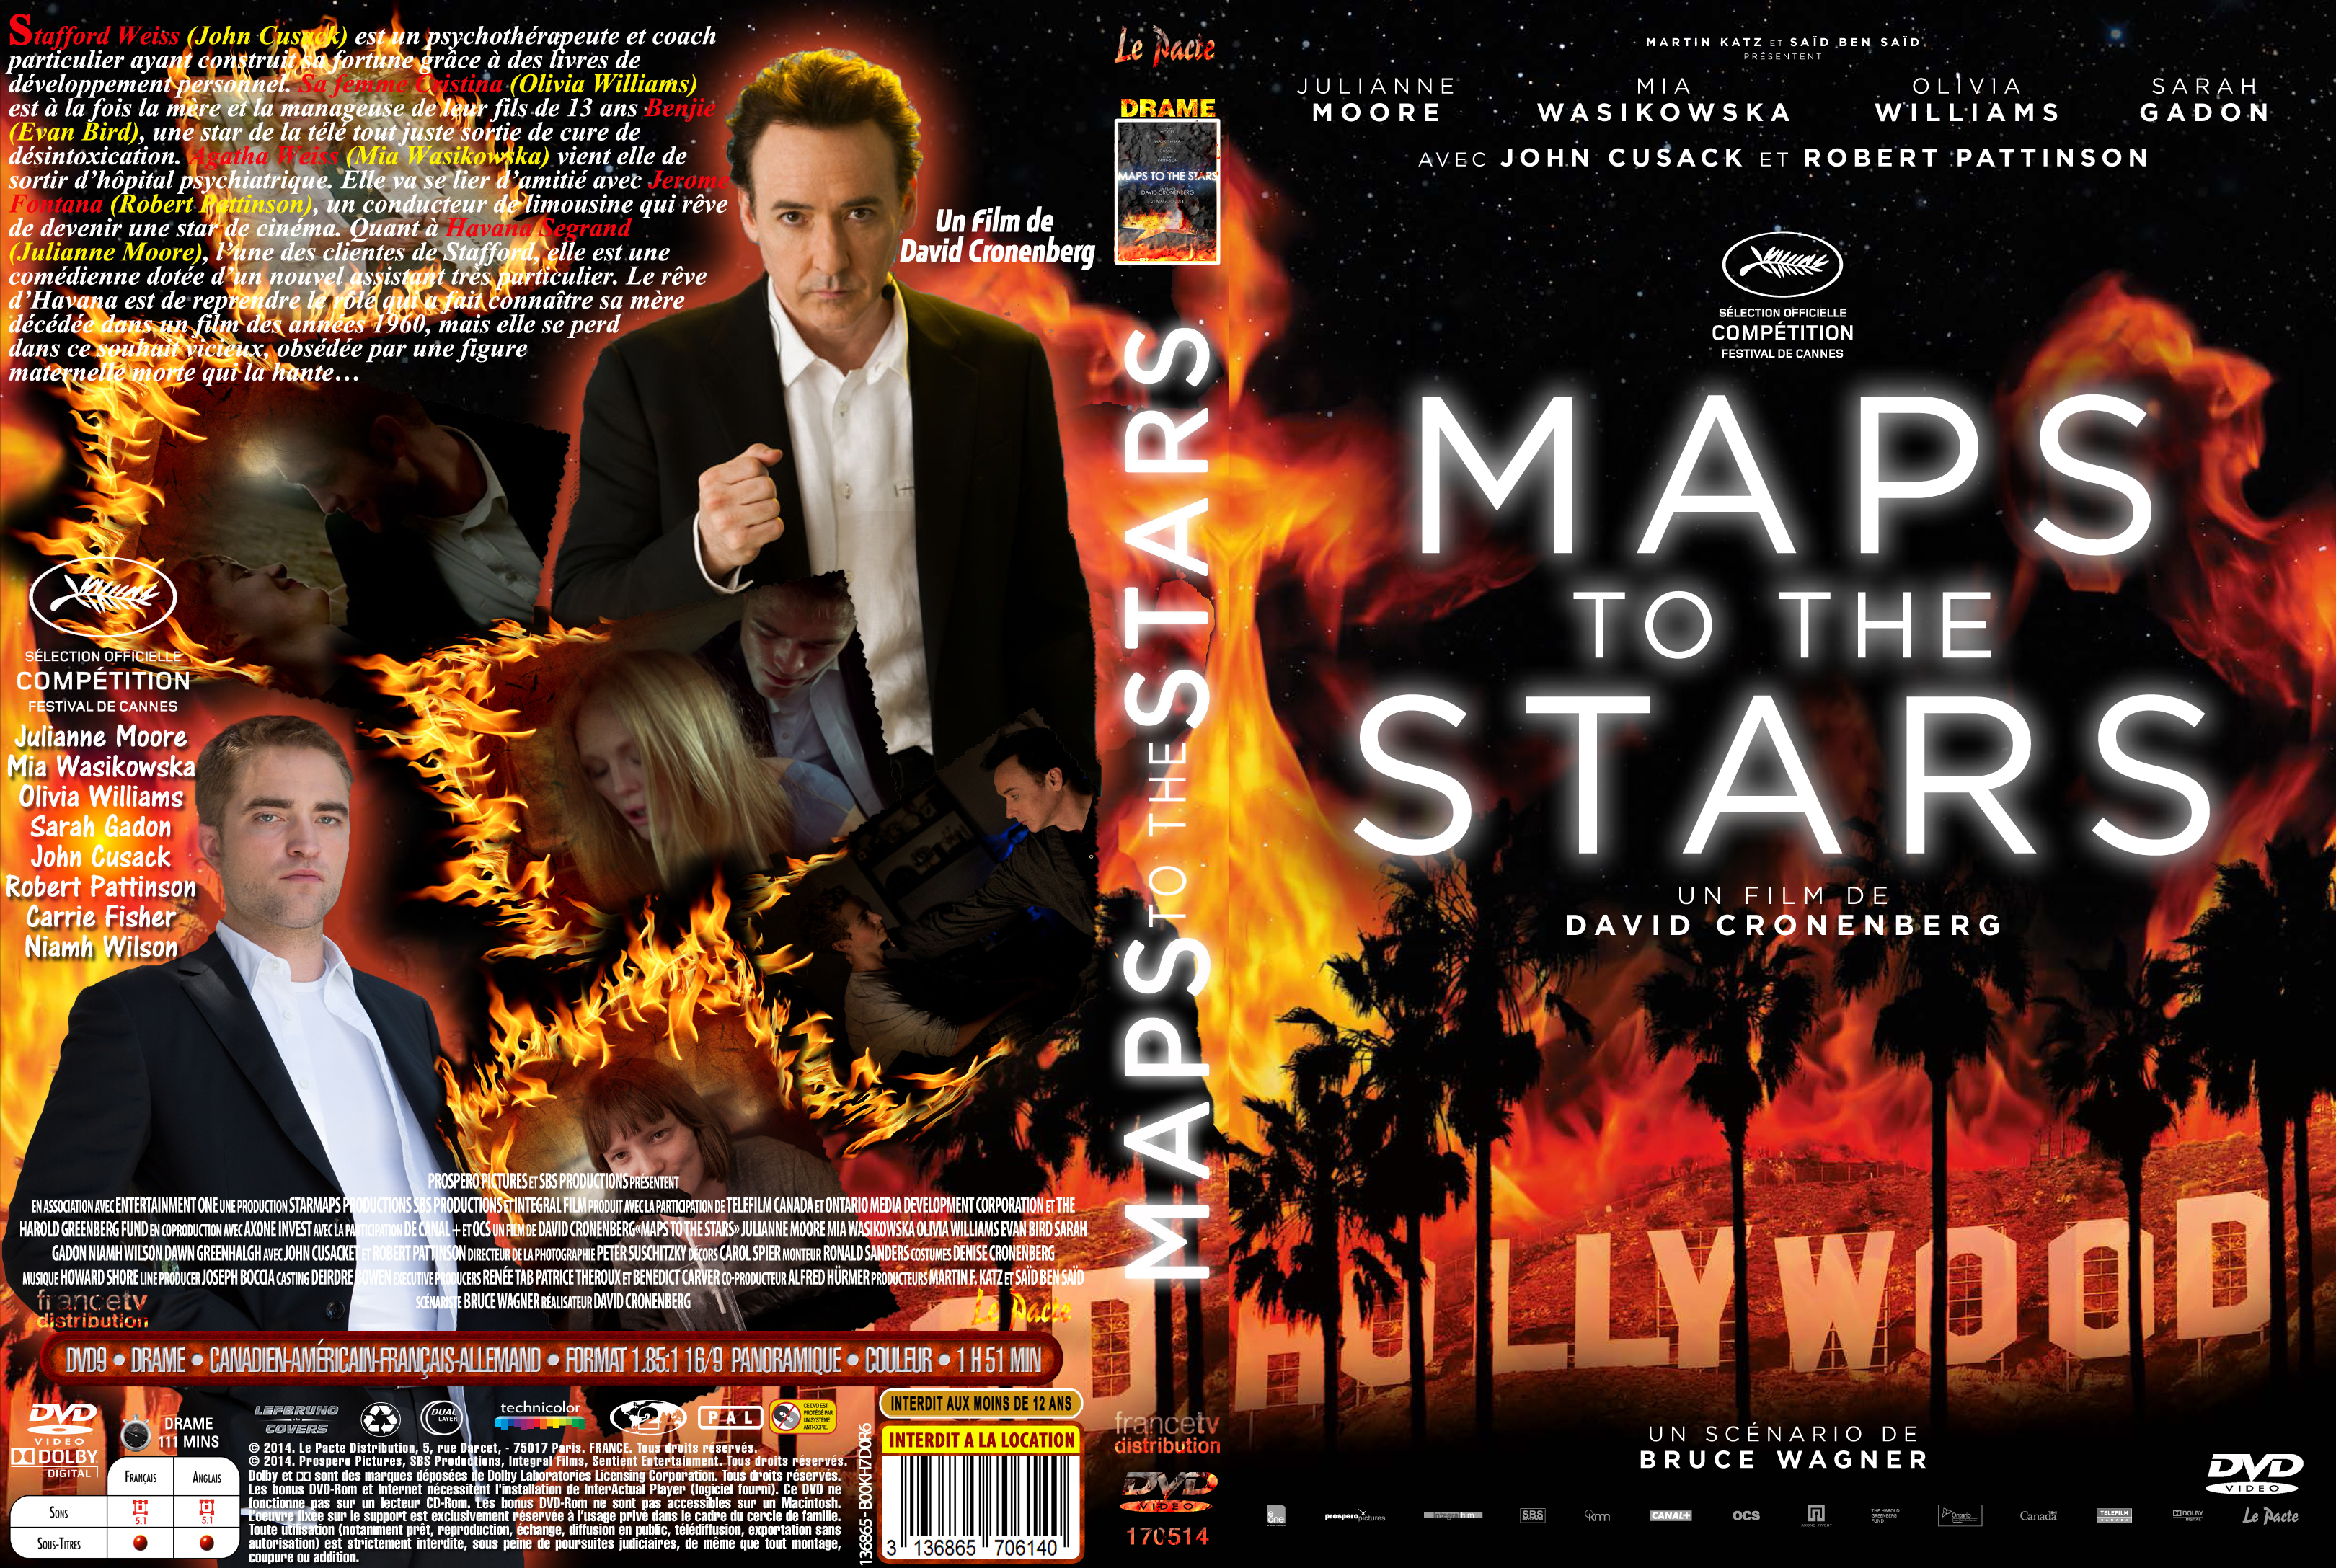 Jaquette DVD Maps To The Stars custom